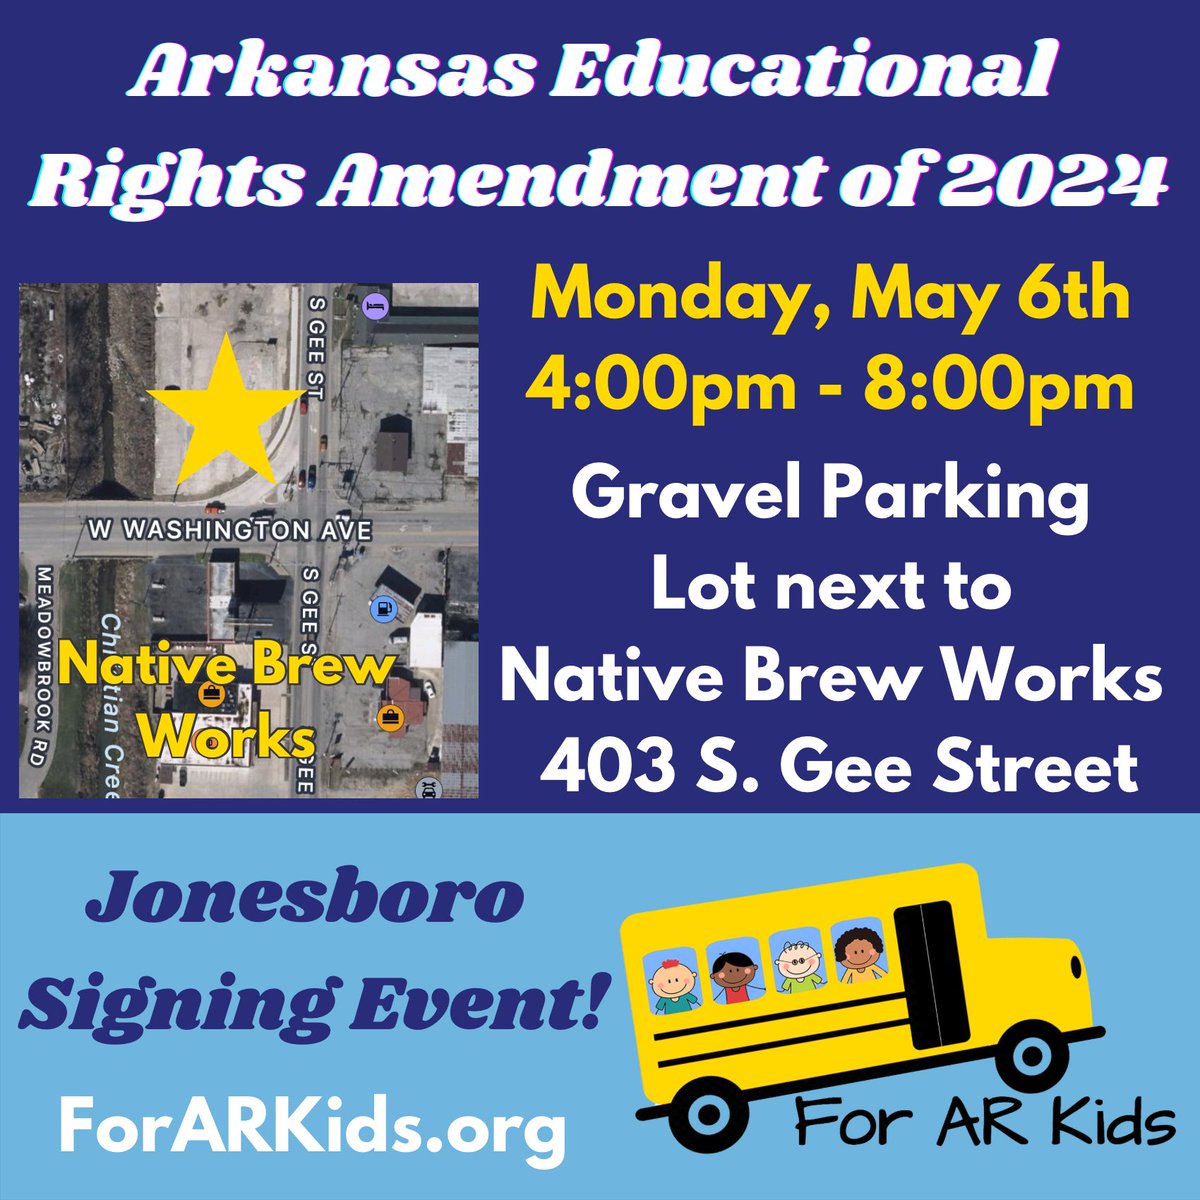 Hello, Jonesboro! If you haven't signed the petition to get the #AREducationalRightsAmendment on the ballot, drive by 403 S. Gee St. today from 4-8 p.m. and join the movement #ForARKids.
Sign. Follow. Share. Like.
#RegnantPopulus #Arkansas #arpx